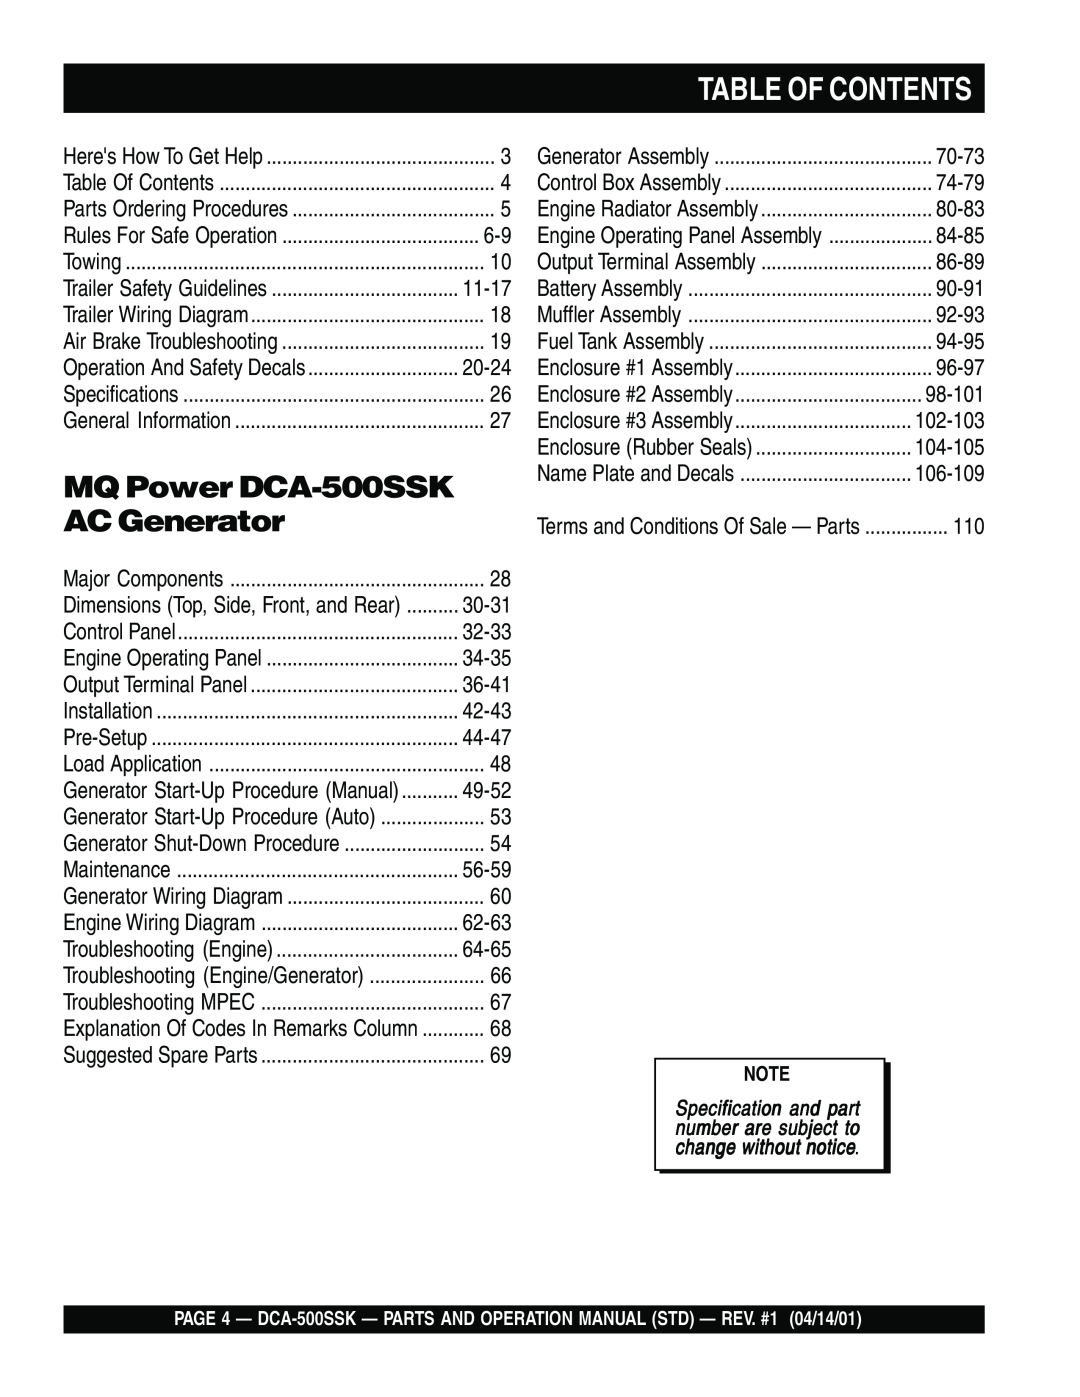 Multiquip operation manual Table Of Contents, MQ Power DCA-500SSK, AC Generator 